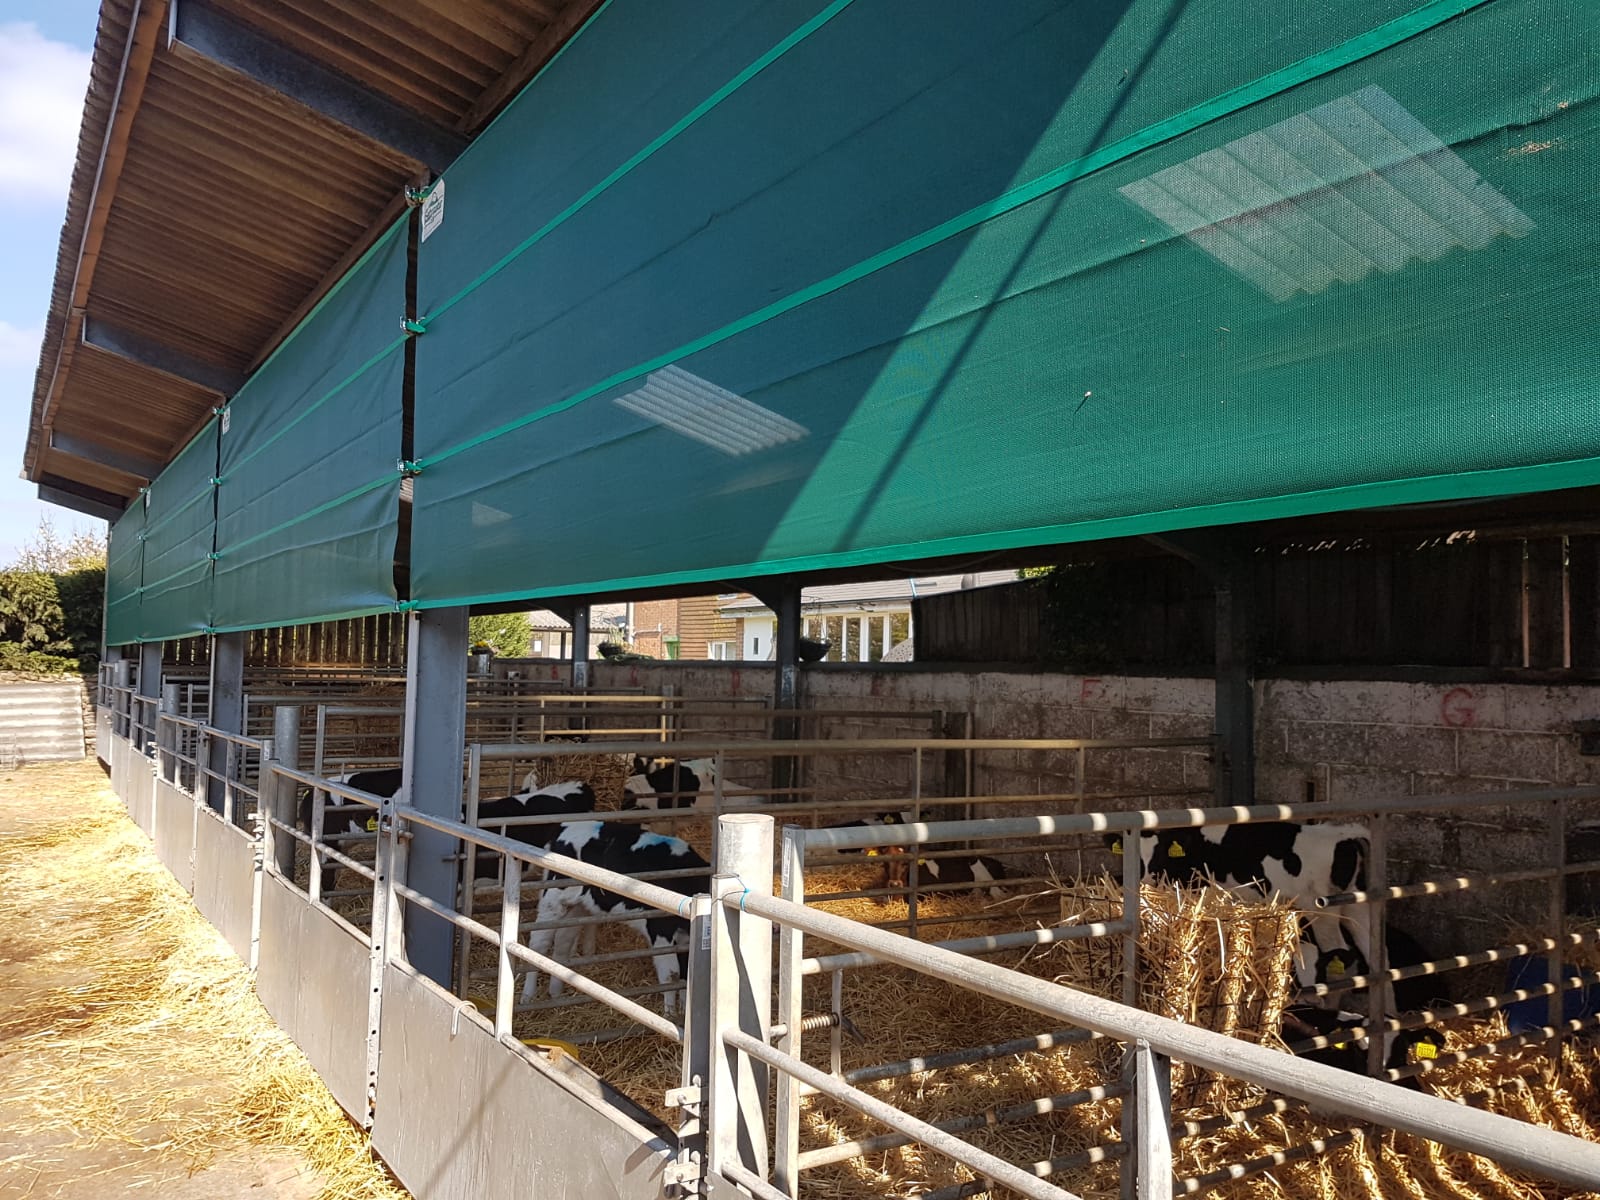 Youngstock housing – Temperature, humidity and ventilation